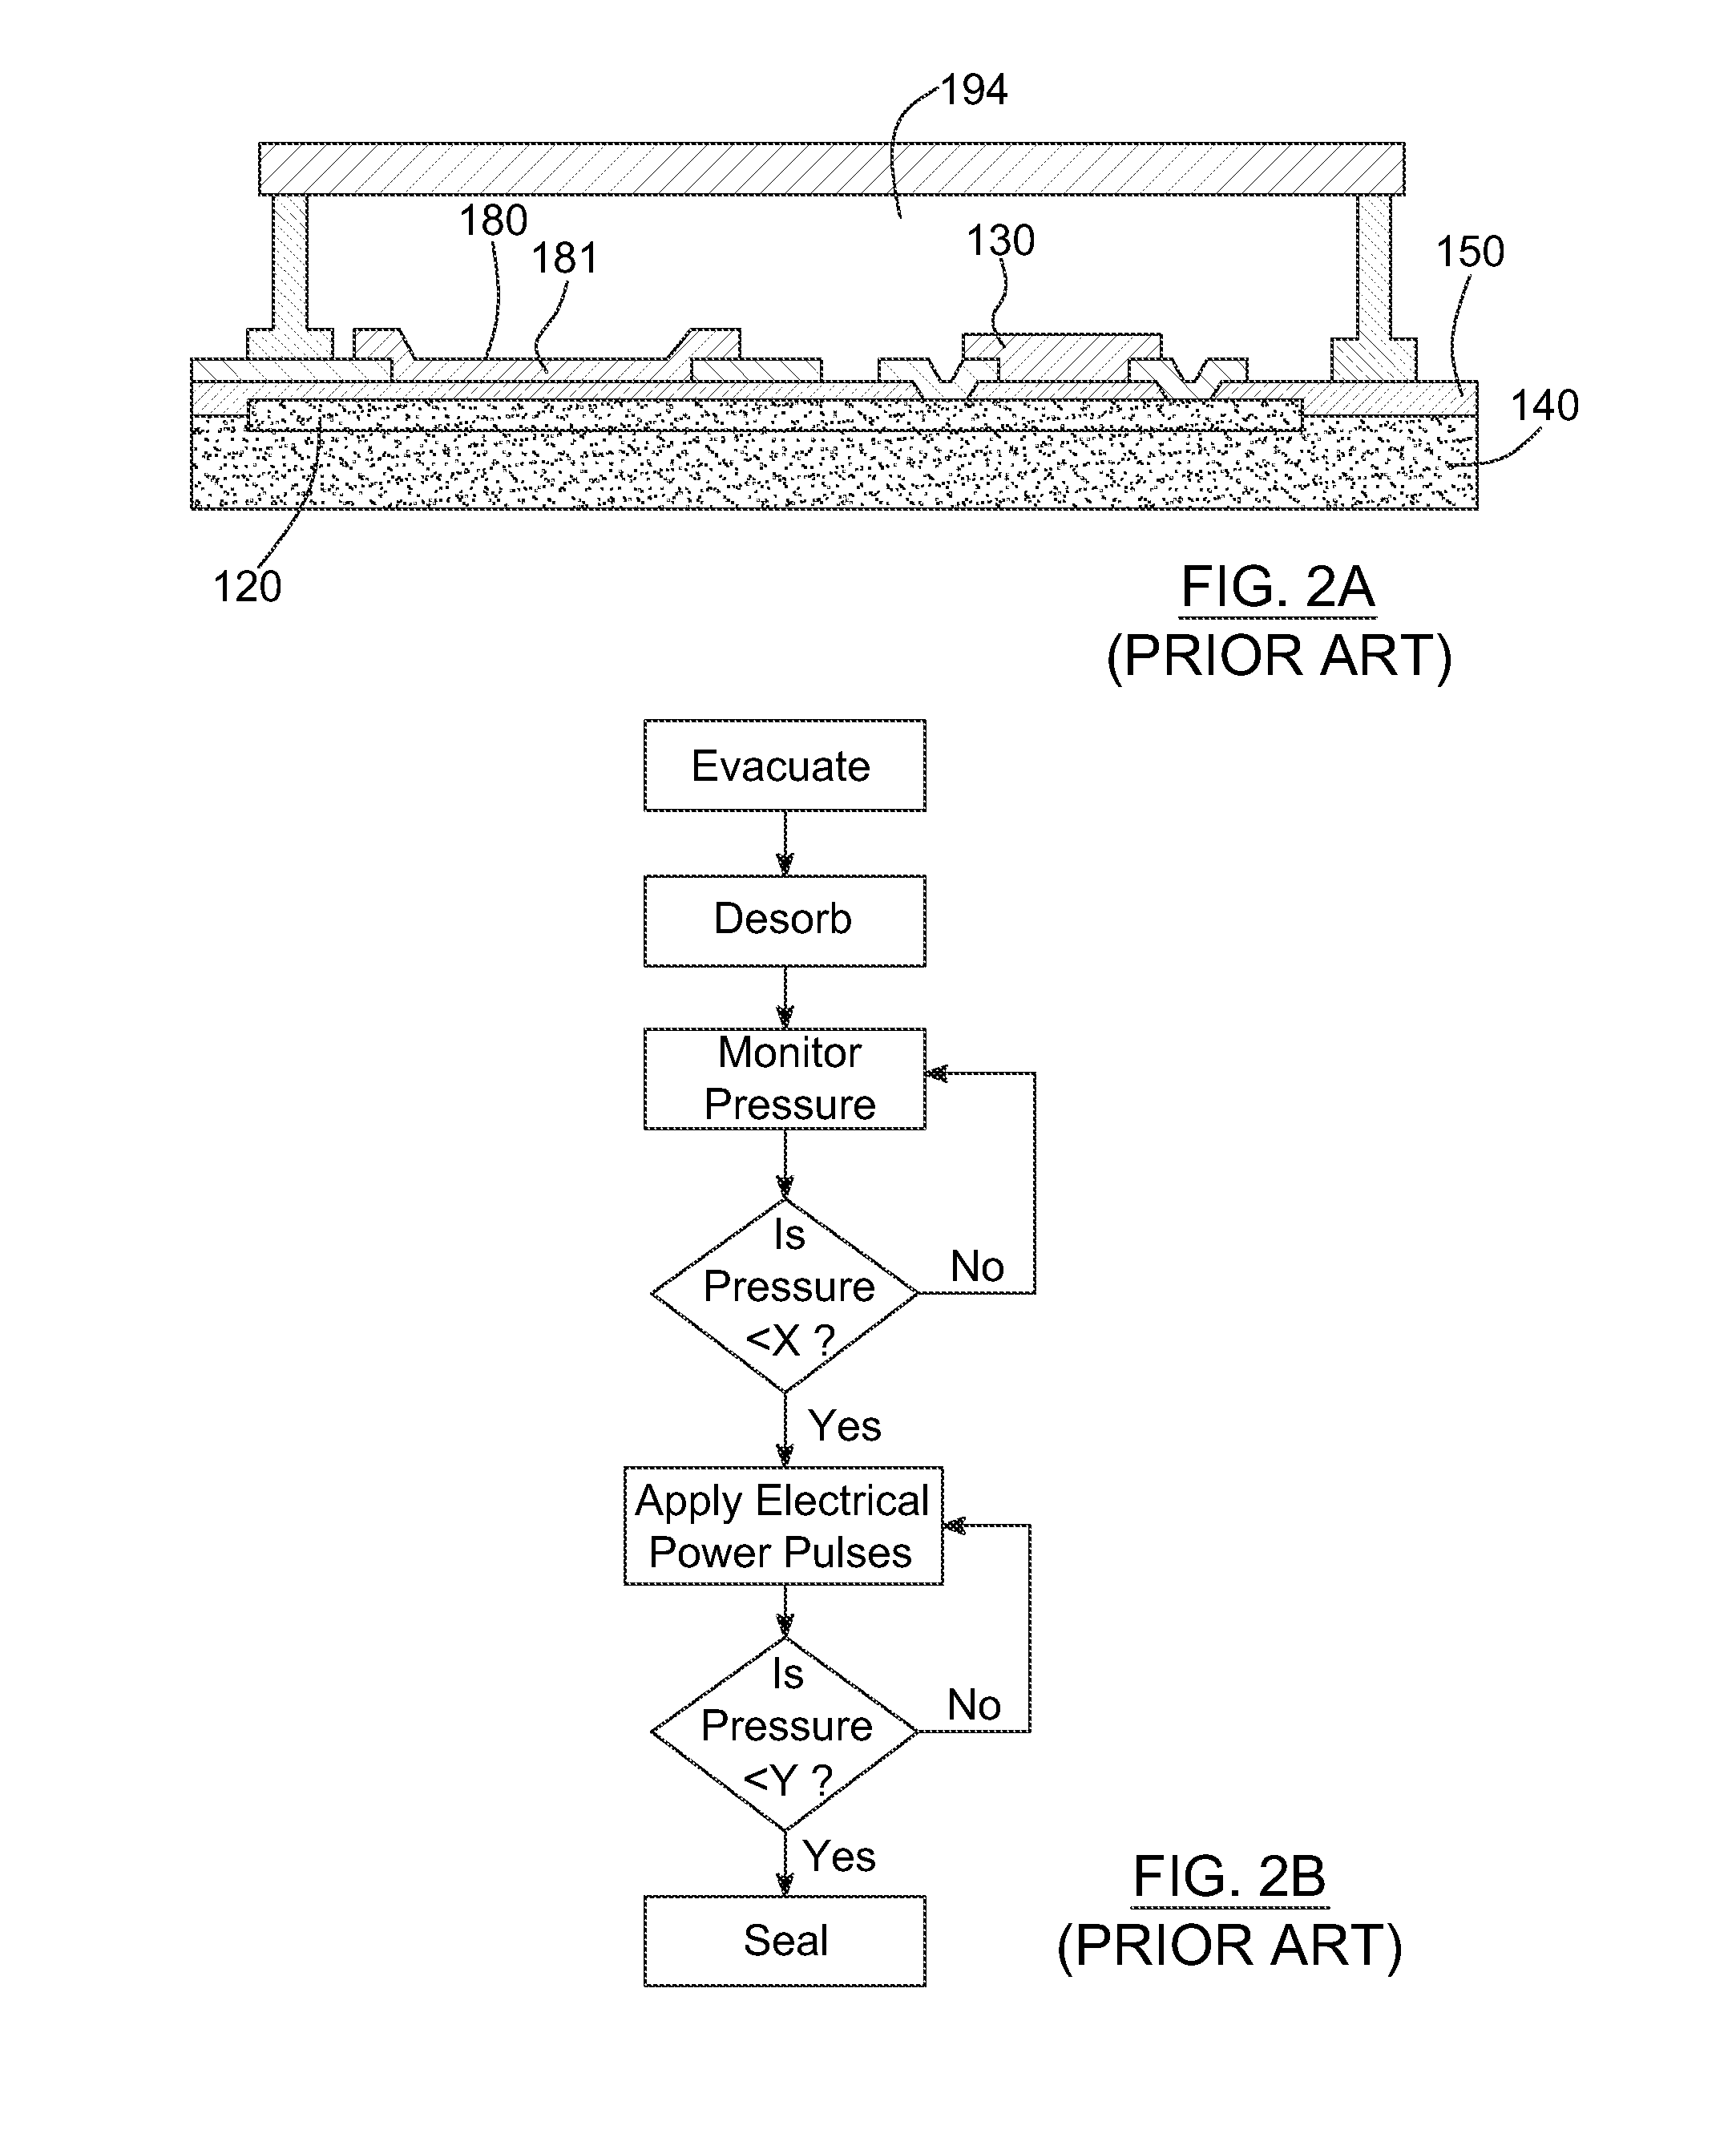 MEMS-based getter microdevice